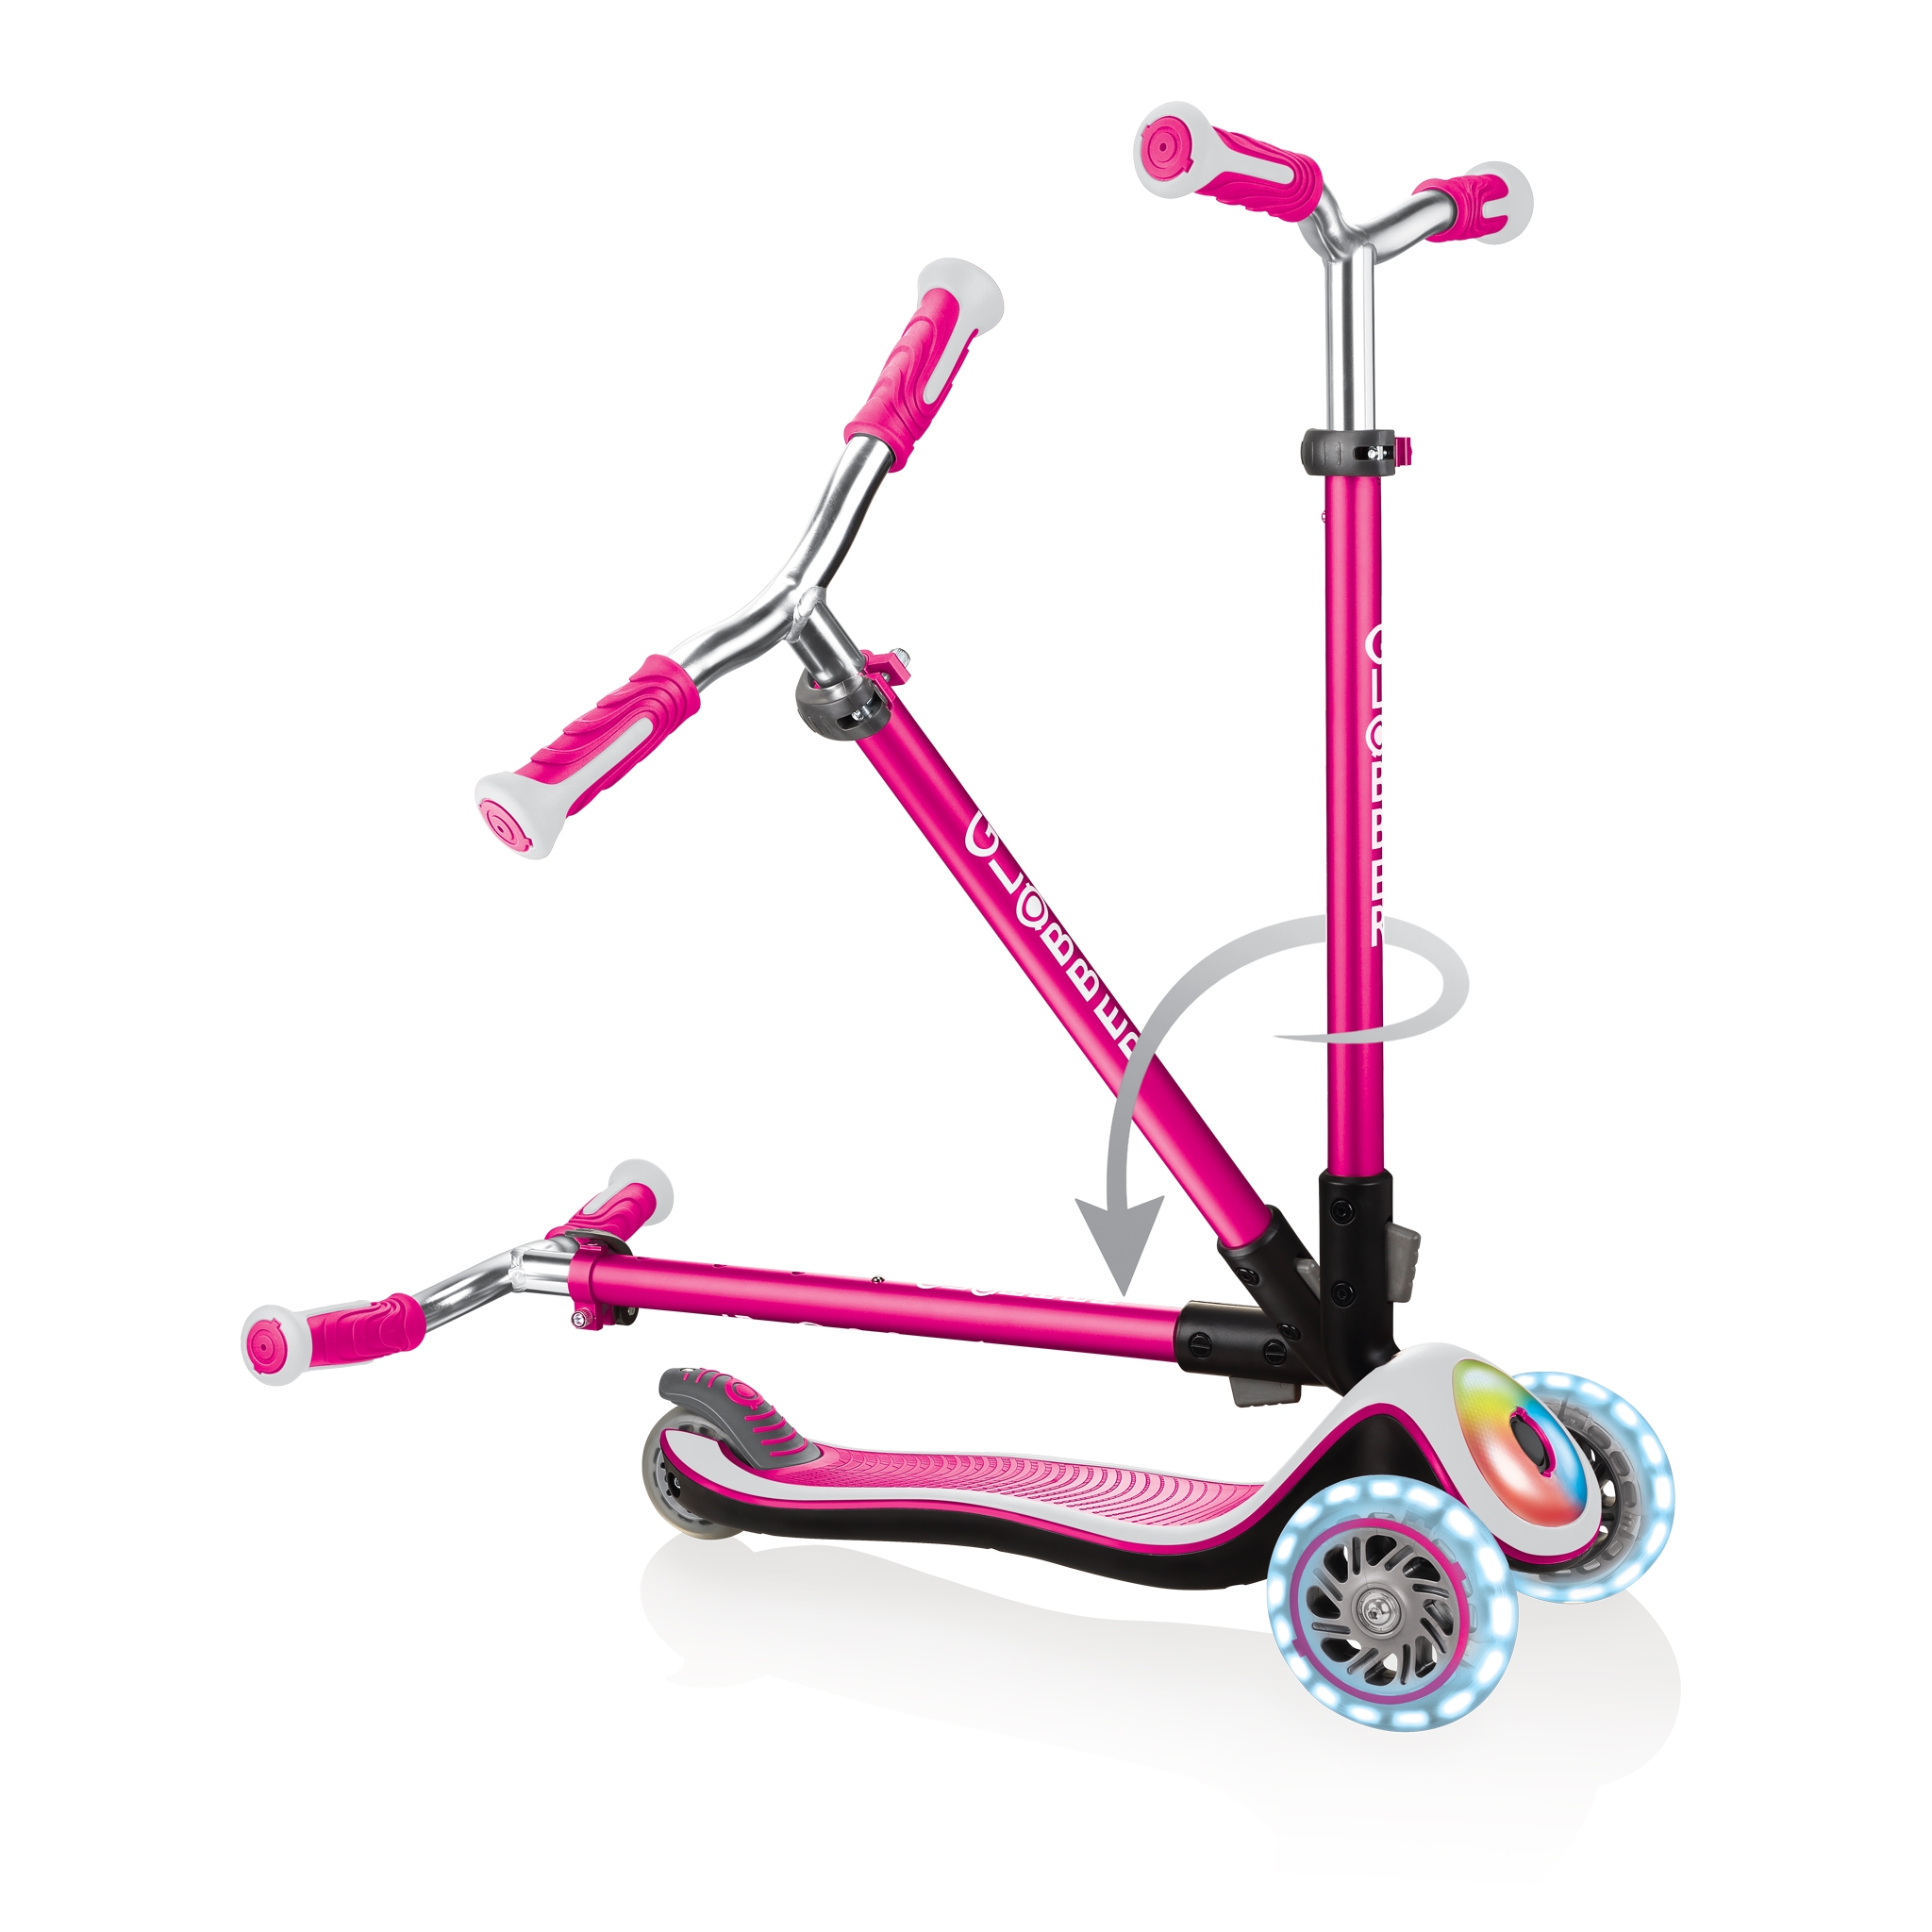 Globber-ELITE-PRIME-best-3-wheel-scooter-for-kids-with-patented-folding-system-pink 3